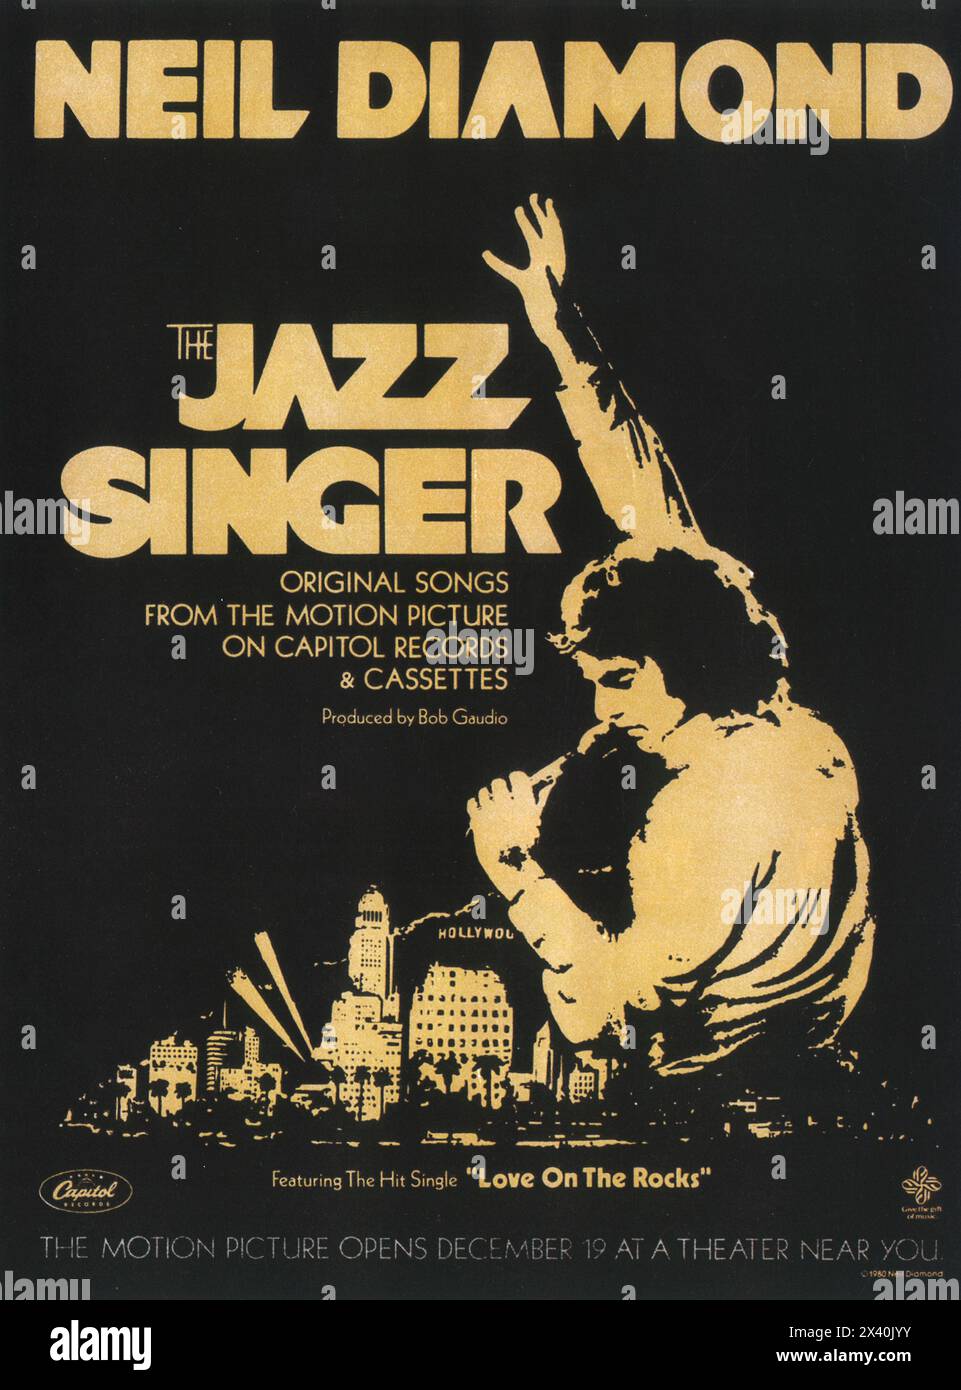 1980 Neil Diamond – The Jazz Singer - original songs from the Movie  album release cover poster Stock Photo